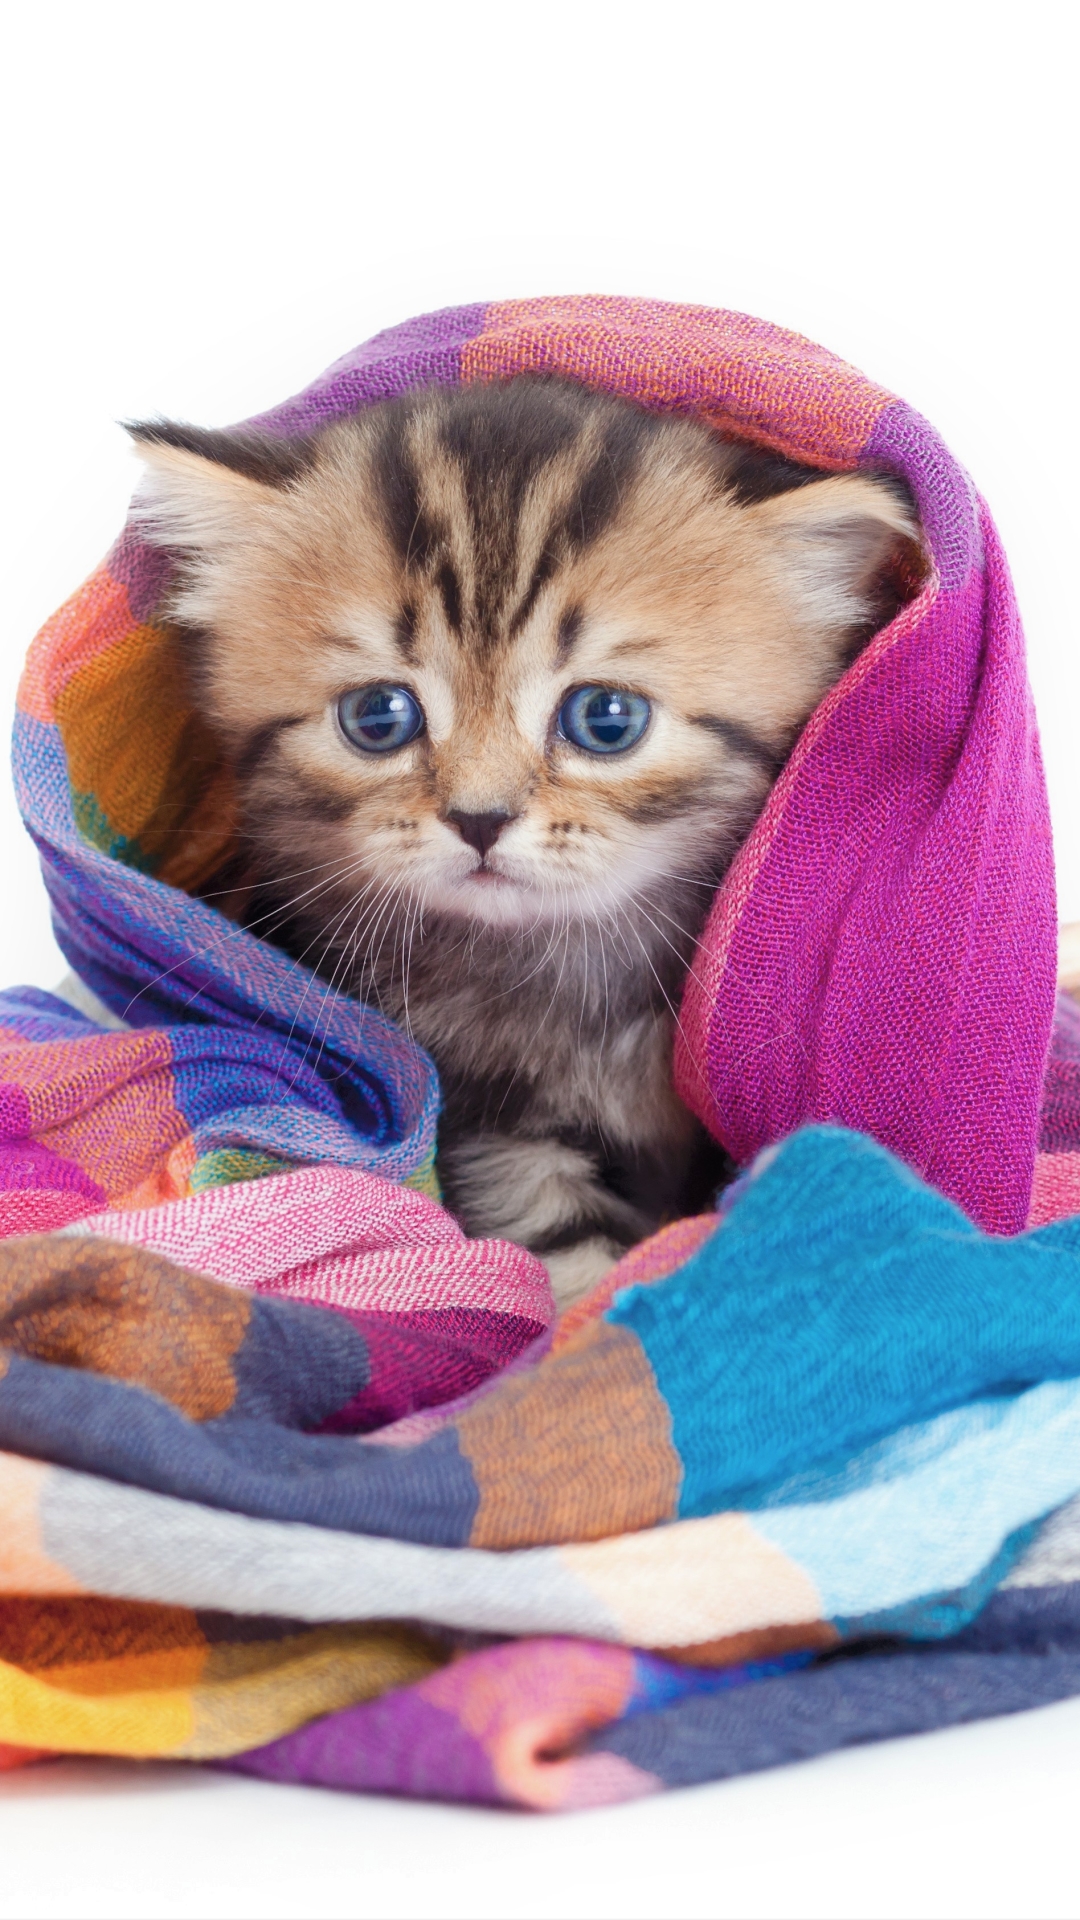 cats, kitten, animal, cat, baby animal, cute, colorful, blanket